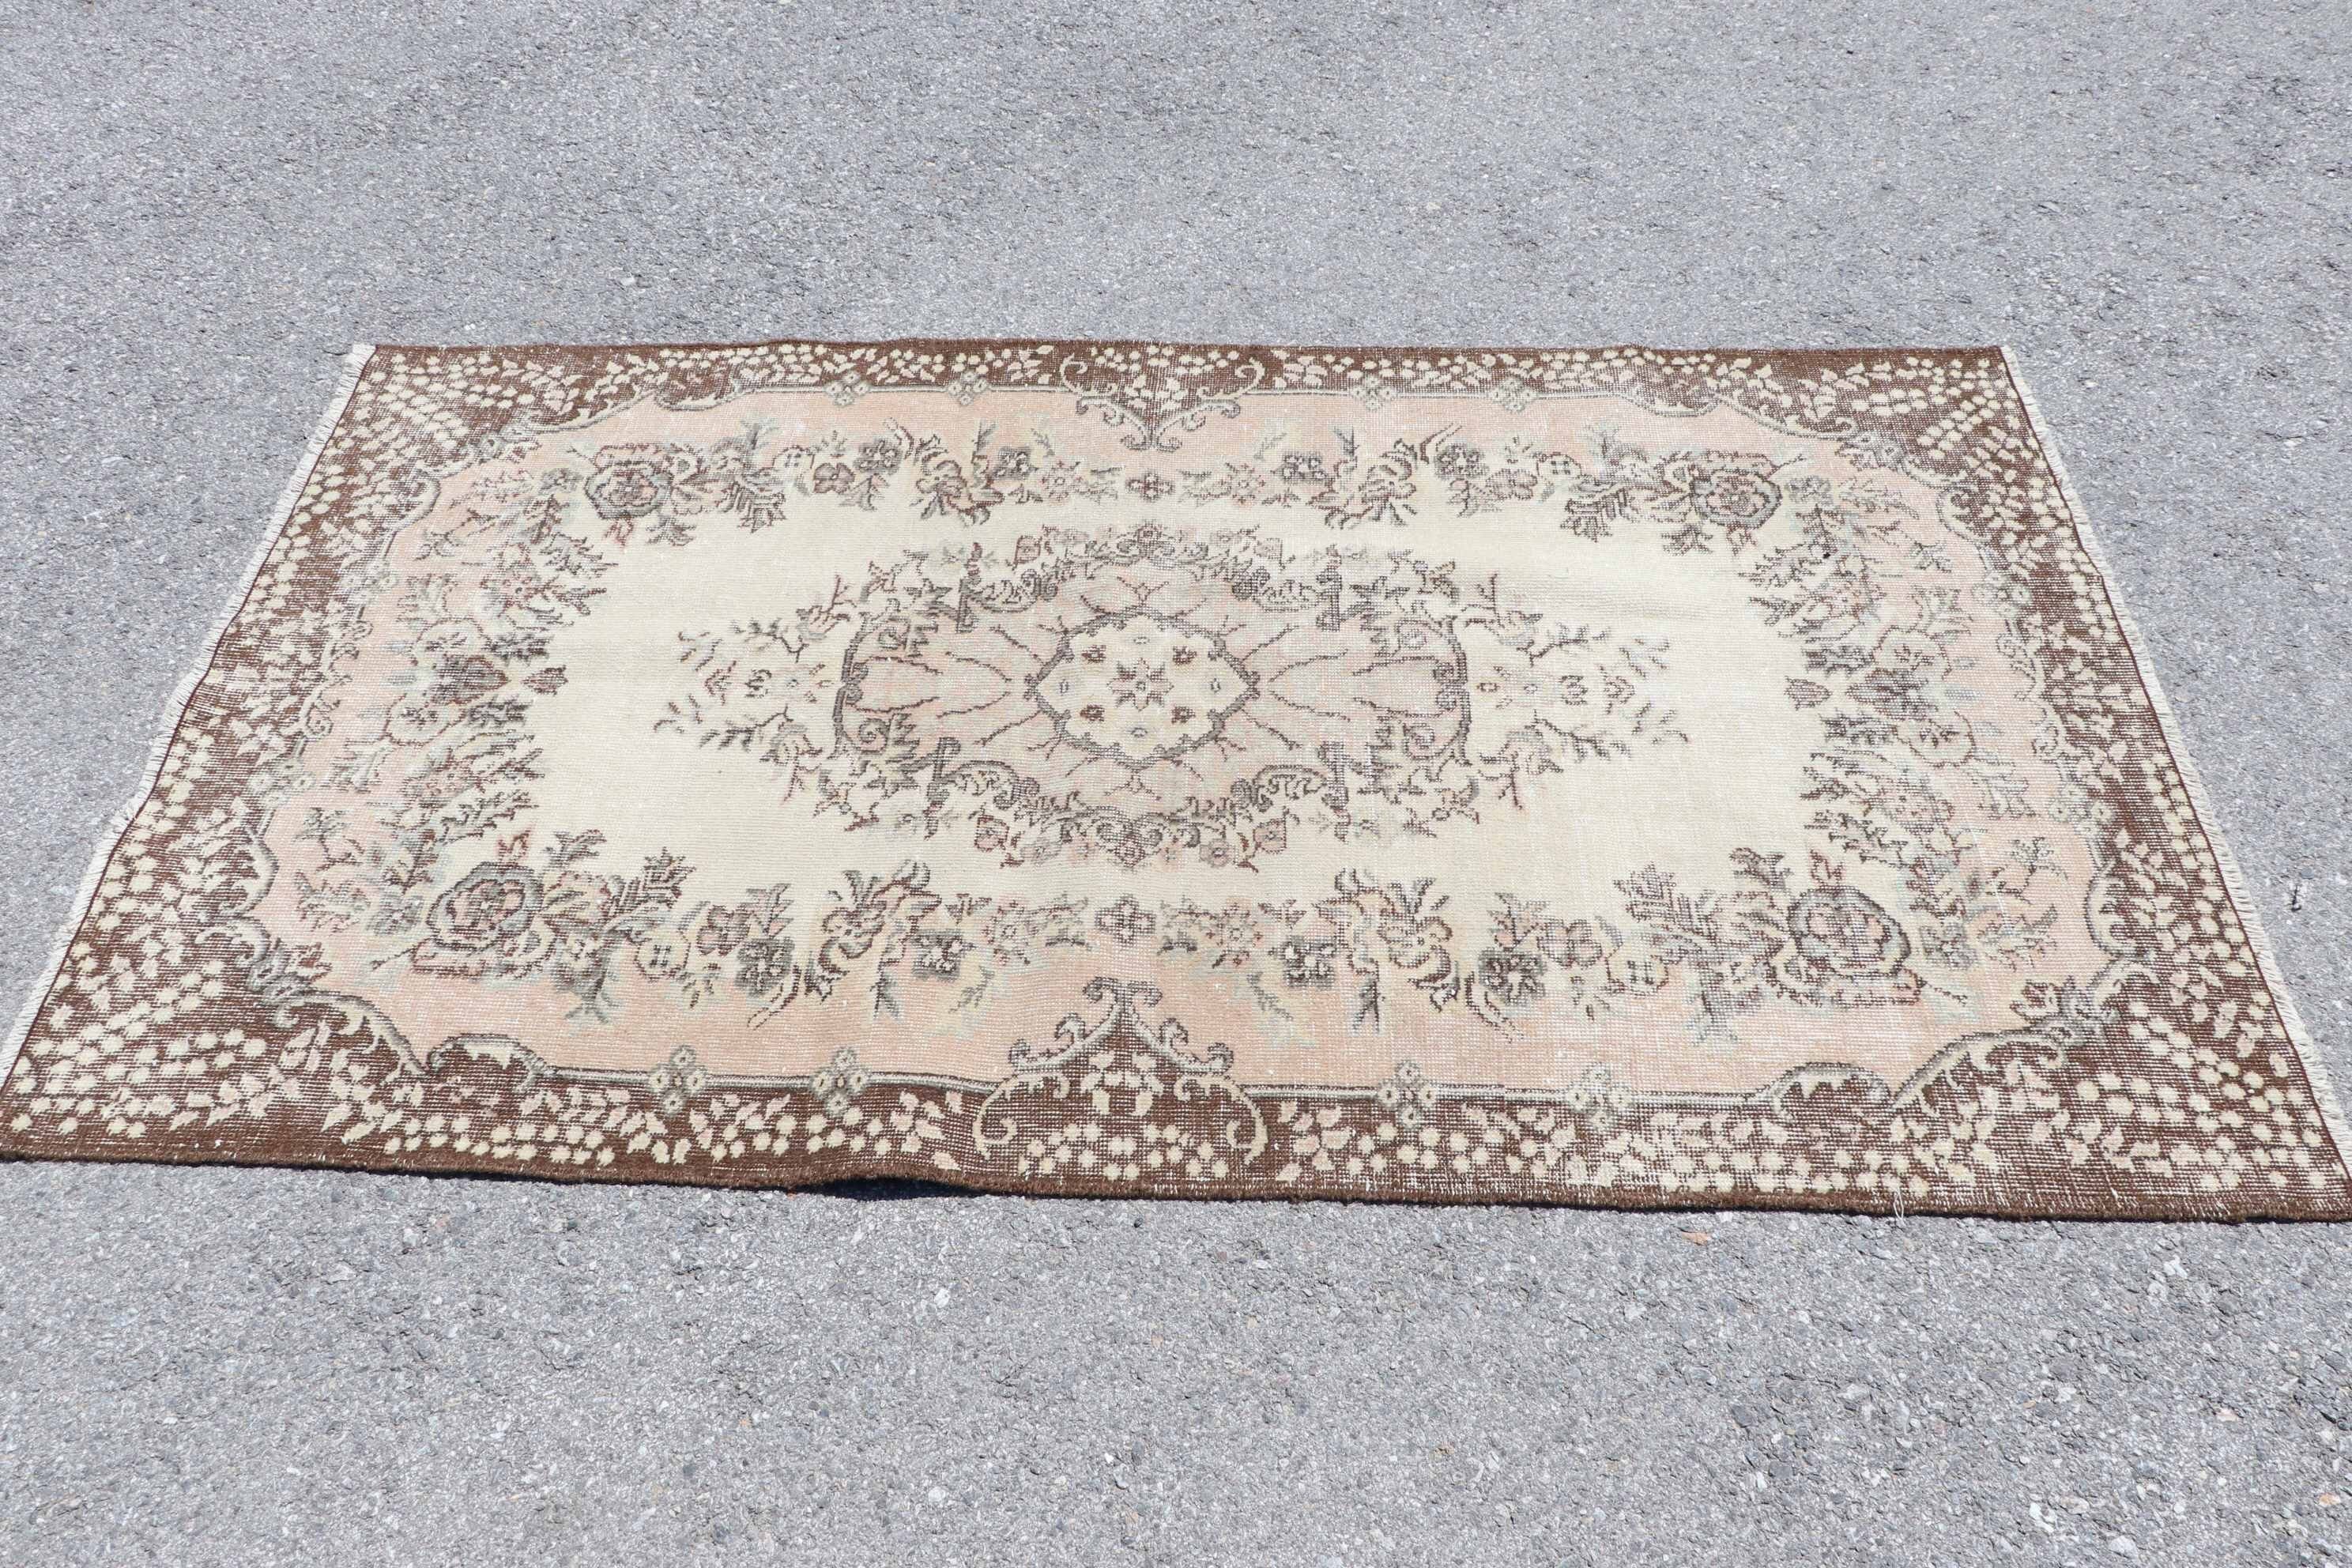 Rugs for Kitchen, Antique Rugs, Living Room Rug, Beige Oushak Rugs, 4x6.9 ft Area Rugs, Art Rugs, Moroccan Rug, Vintage Rugs, Turkish Rugs